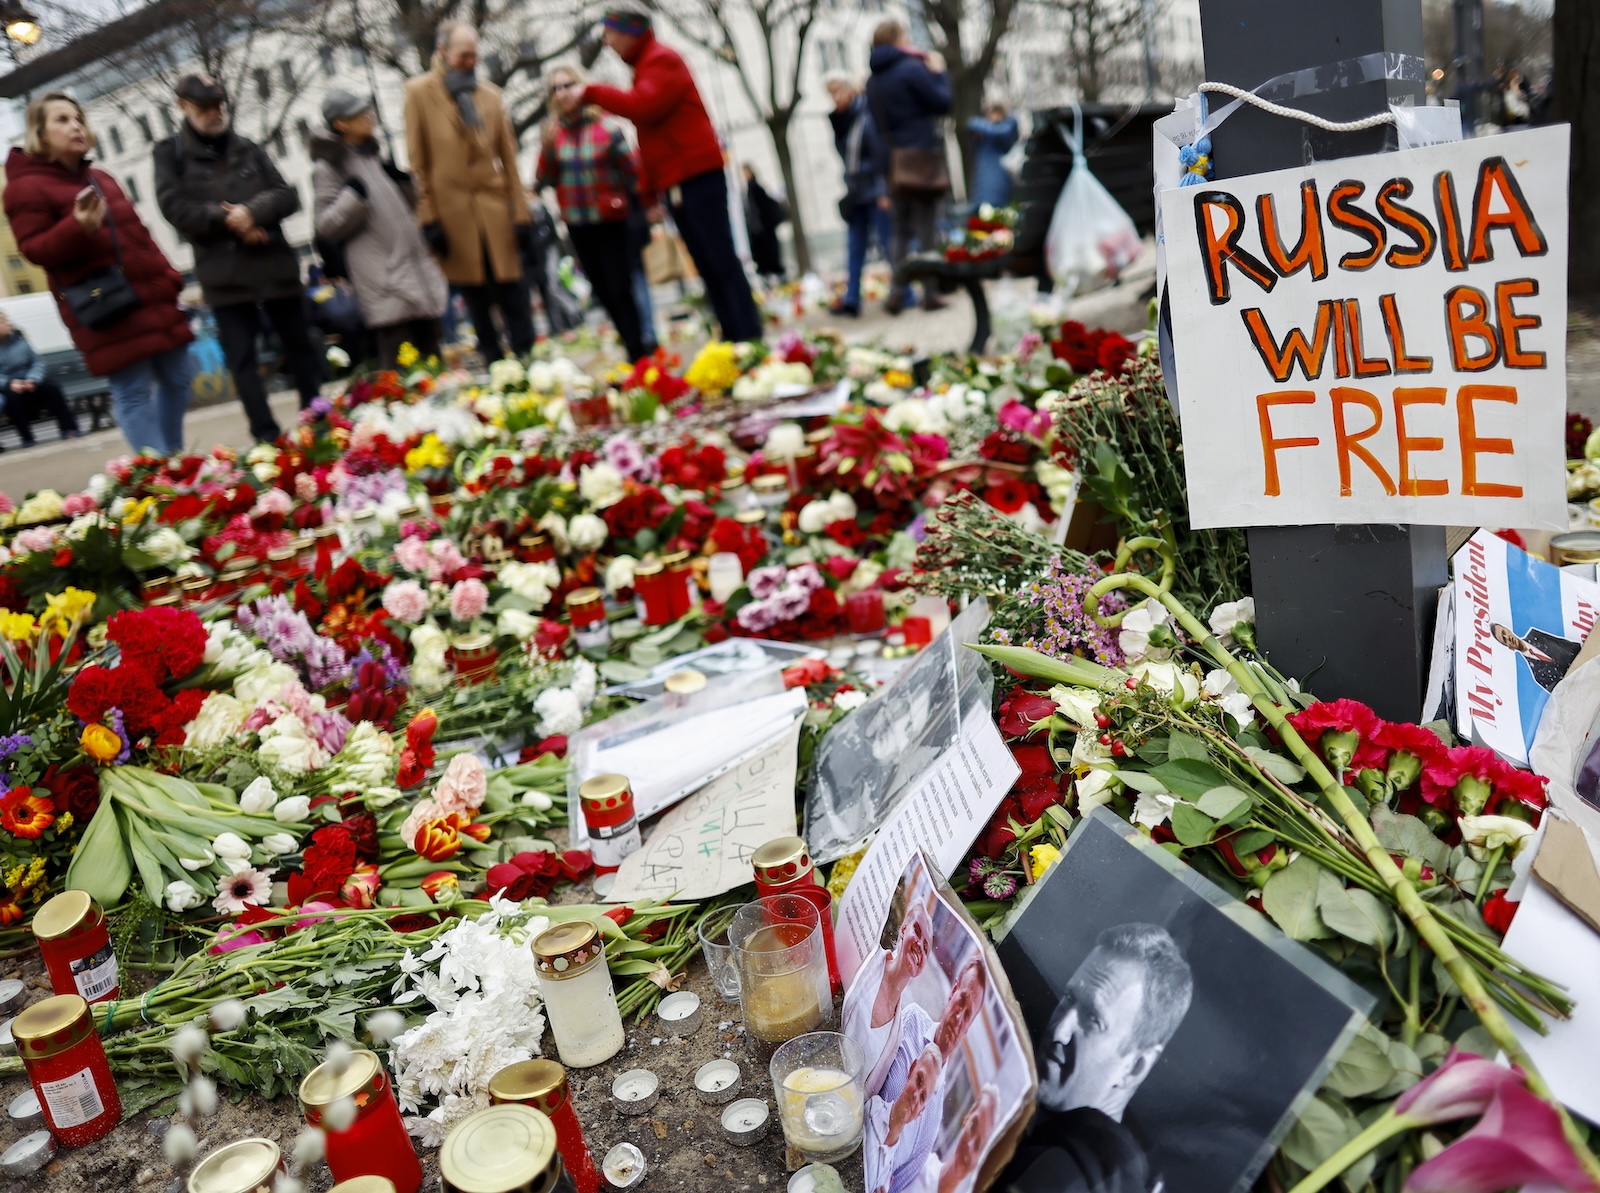 epa11170435 A photo showing late Russian opposition leader Alexei Navalny sits among floral tributes outside the Russian embassy in Berlin, Germany, 21 February 2024. Outspoken Kremlin critic Alexei Navalny died in a penal colony, the Federal Penitentiary Service of the Yamalo-Nenets Autonomous District announced on 16 February 2024. In late 2023 Navalny was transferred to an Arctic penal colony, considered one of the harshest prisons.  EPA/HANNIBAL HANSCHKE